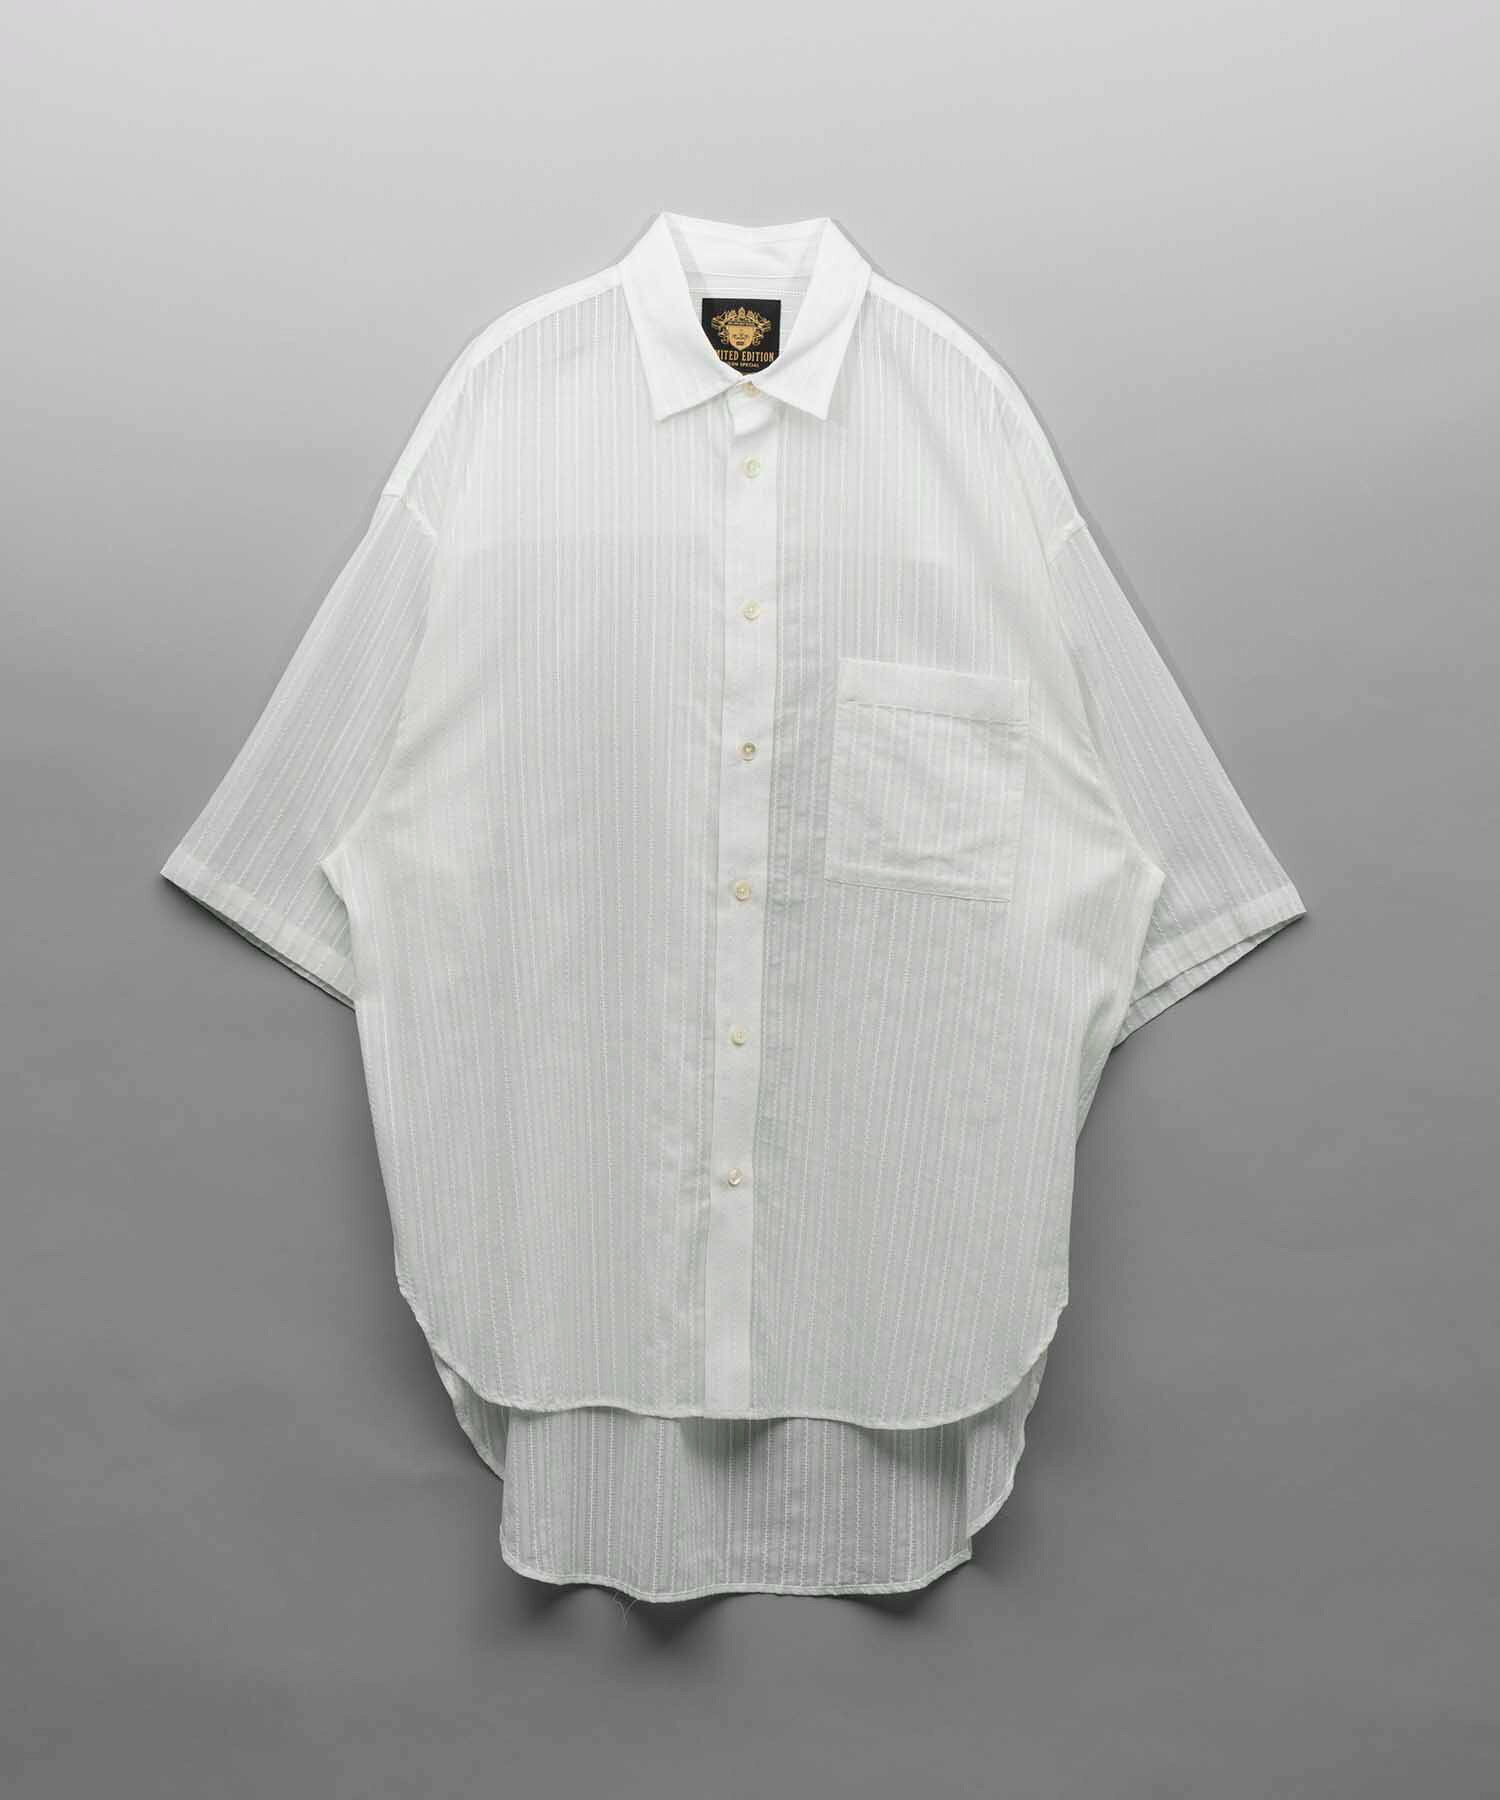 【LIMITED EDITION】Prime-Over Short Sleeve Shirt Coat